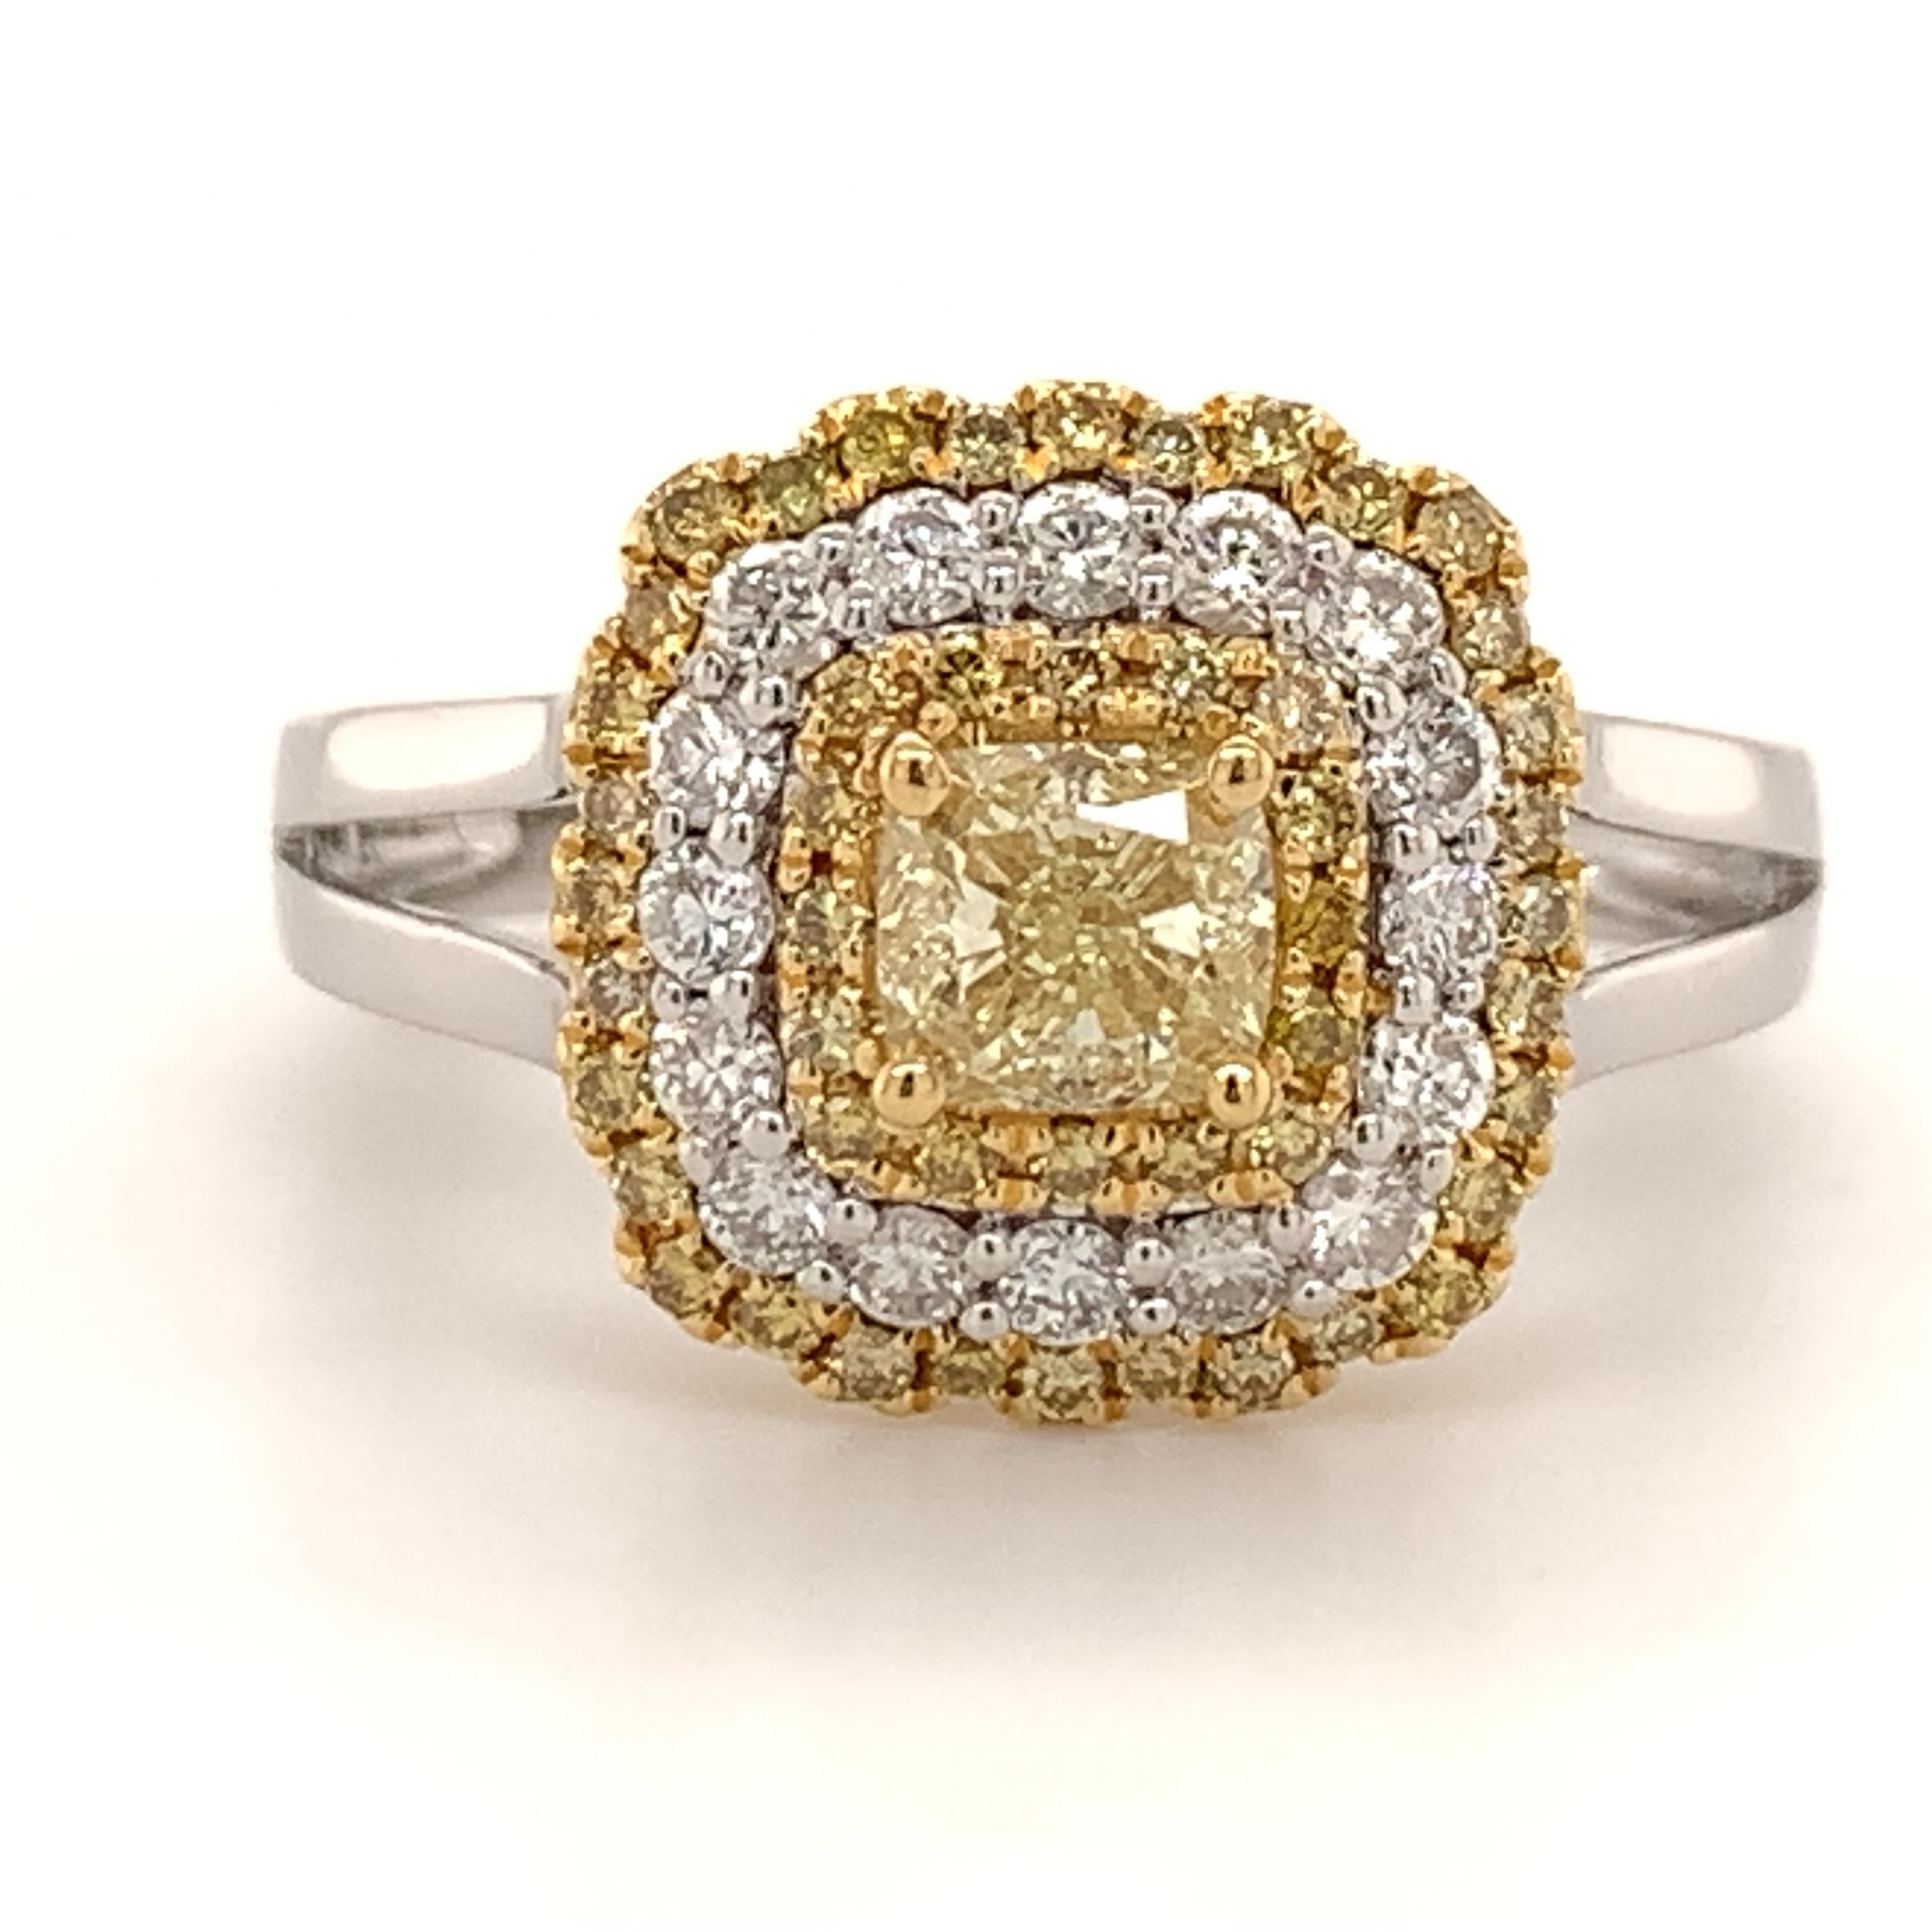 Contemporary 0.61 Carat Fancy Yellow Diamond Bridal Ring For Sale